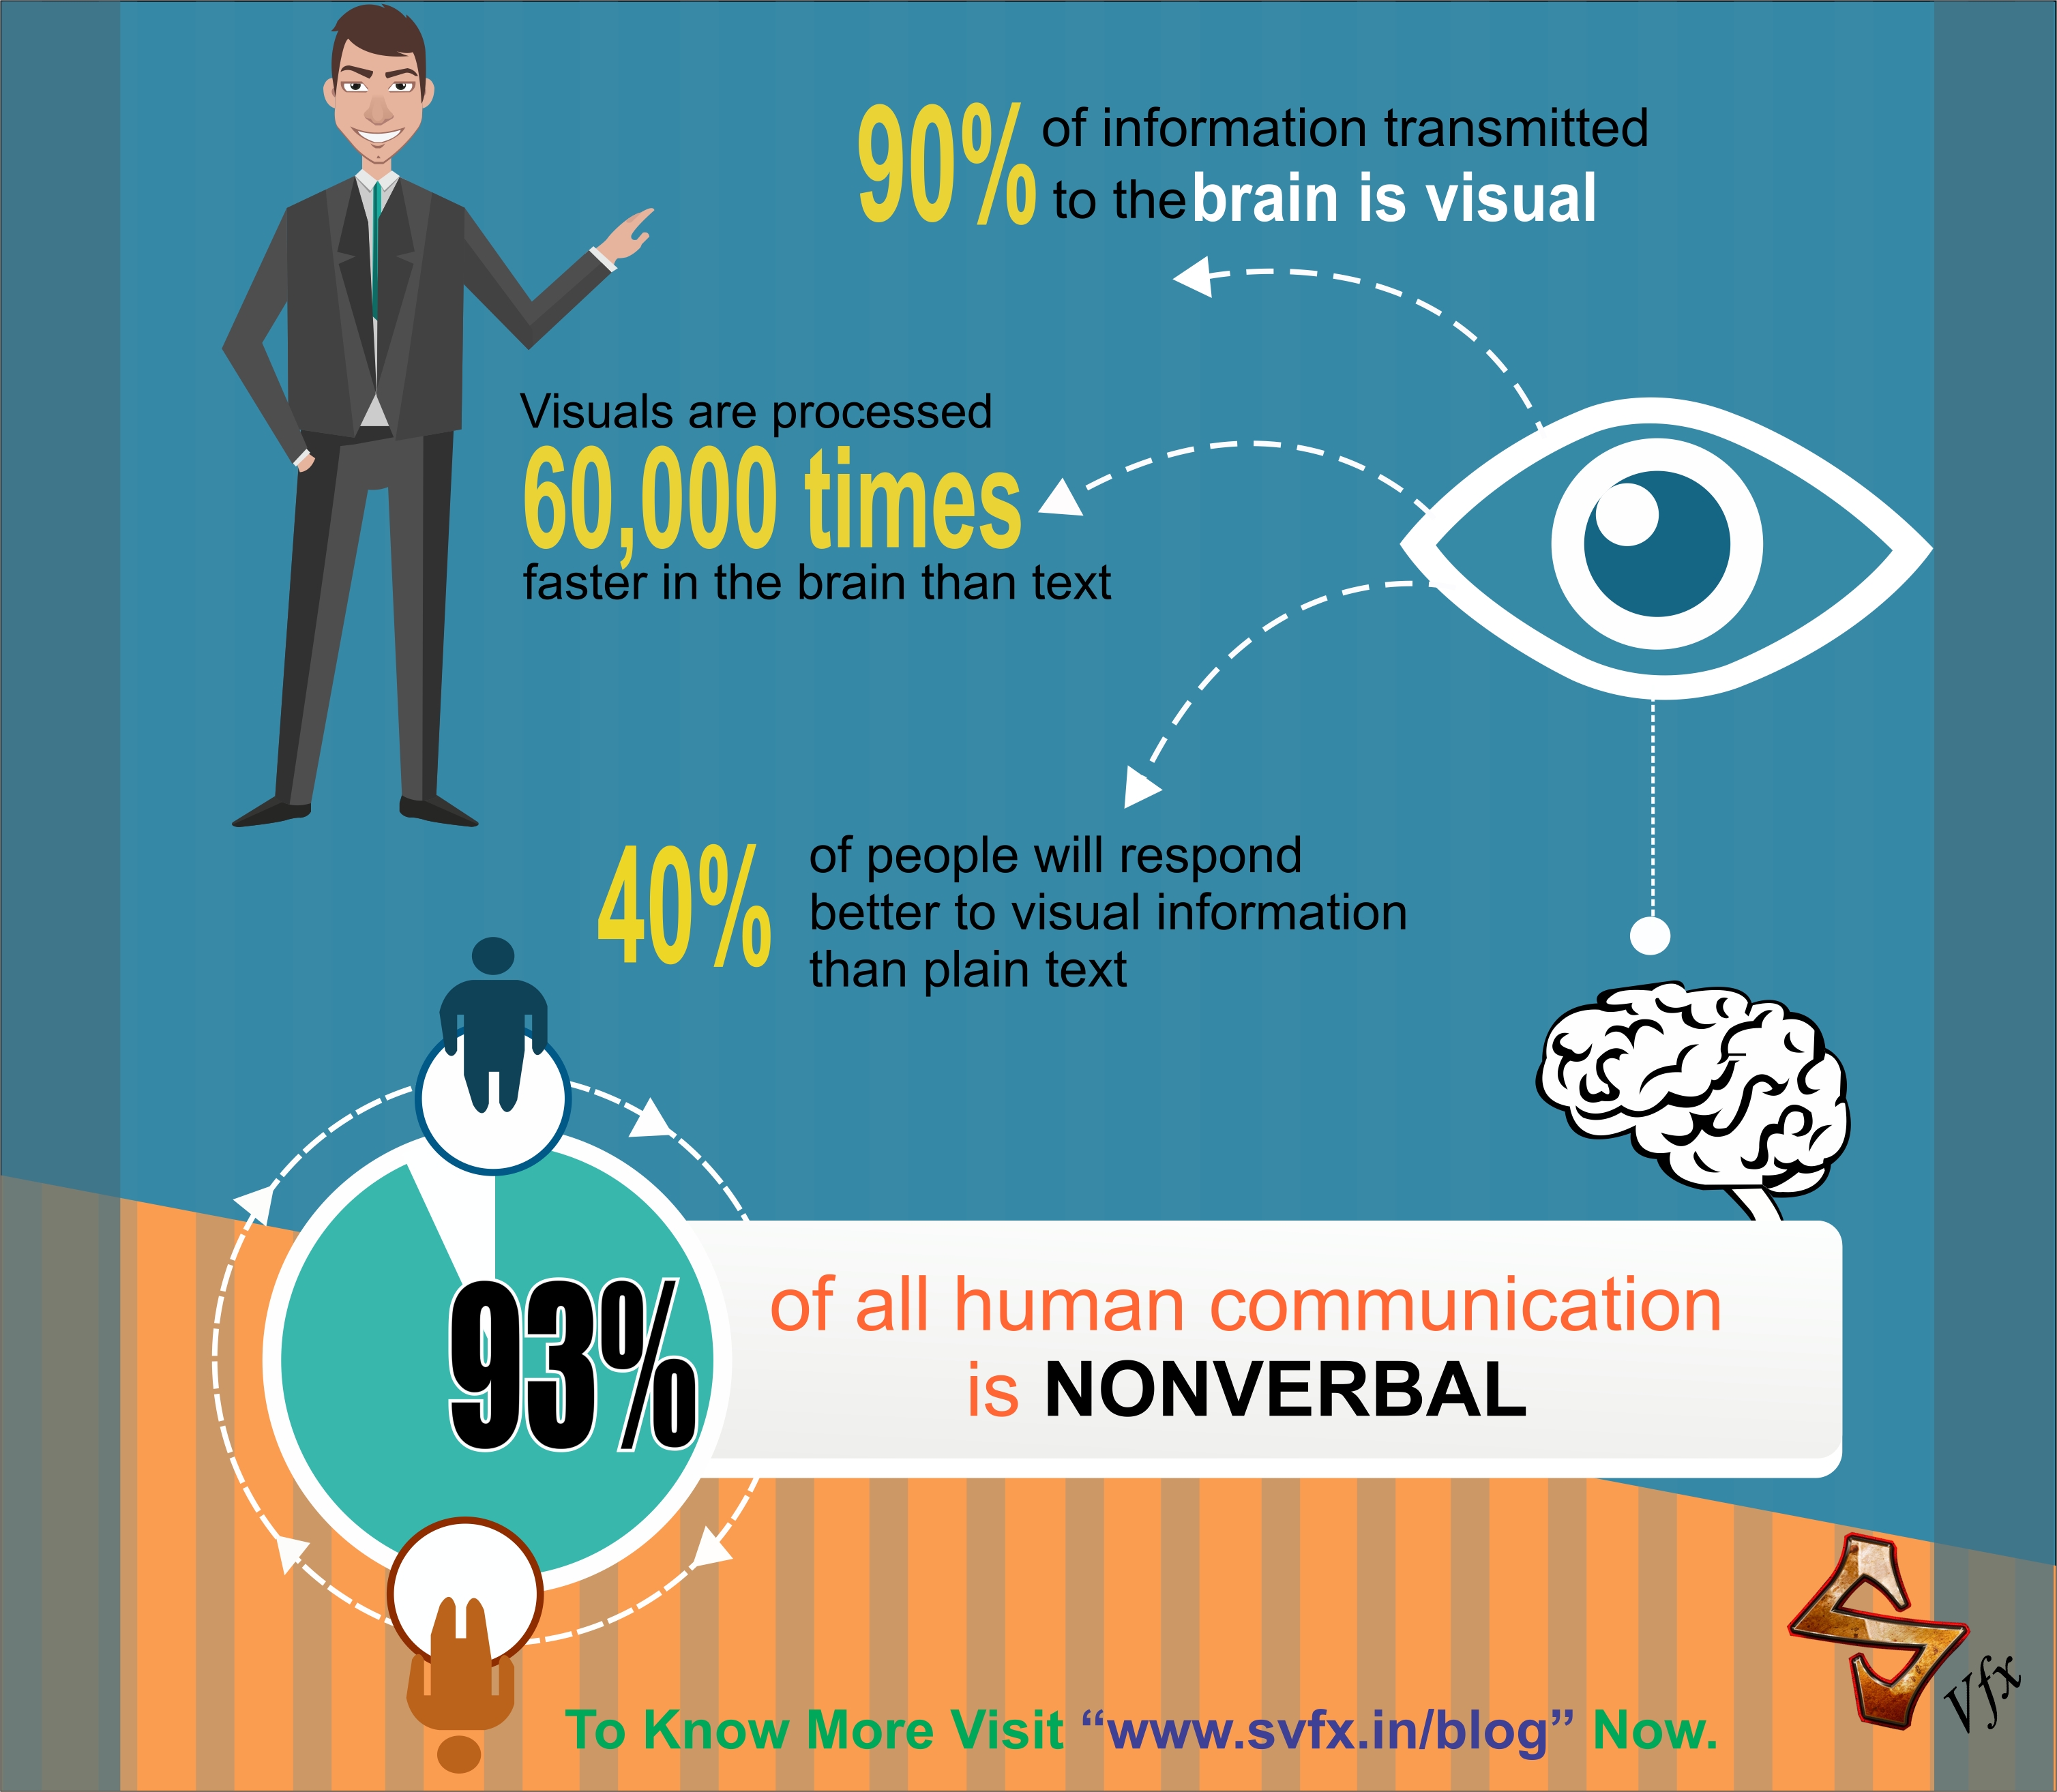 This info graphic explains why visual content is extremely effective in social media marketing.